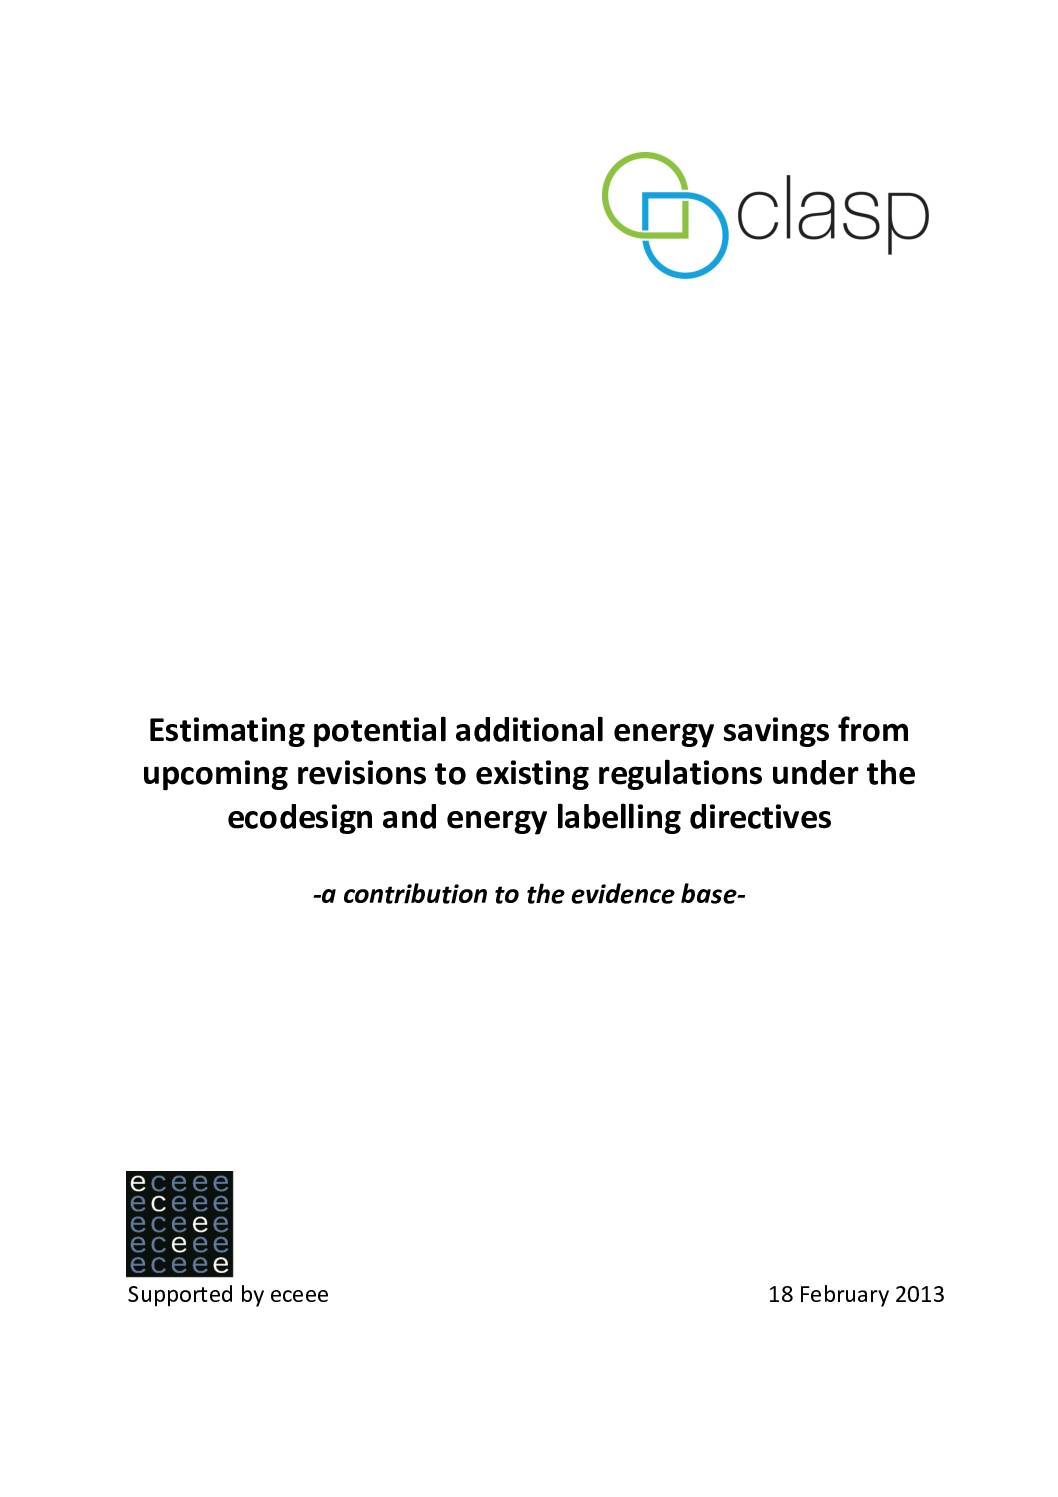 Estimating potential additional energy savings from upcoming revisions to existing regulations under the ecodesign and energy labelling directives – A contribution to the evidence base